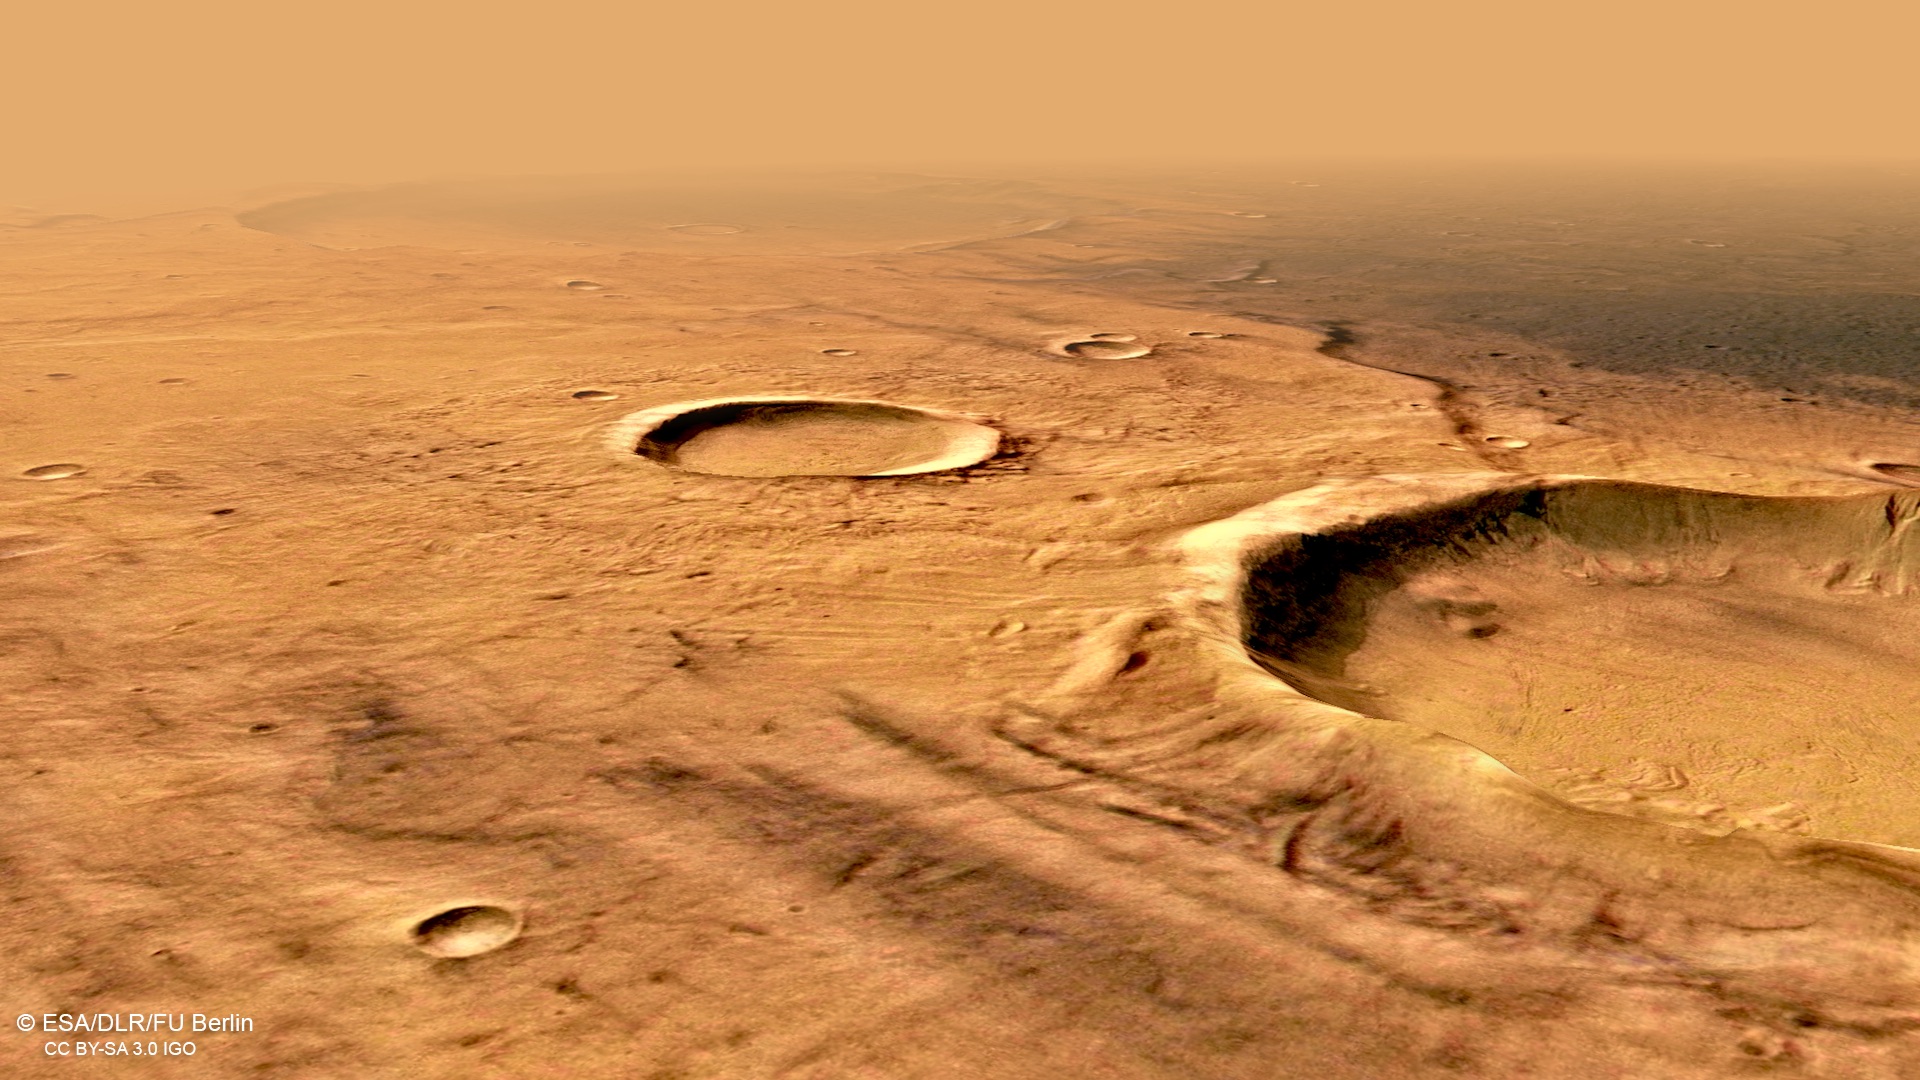 Planet Mars. New INCREDIBLE Pictures have AMAZED ALL HUMANITY terra cimmeria photo